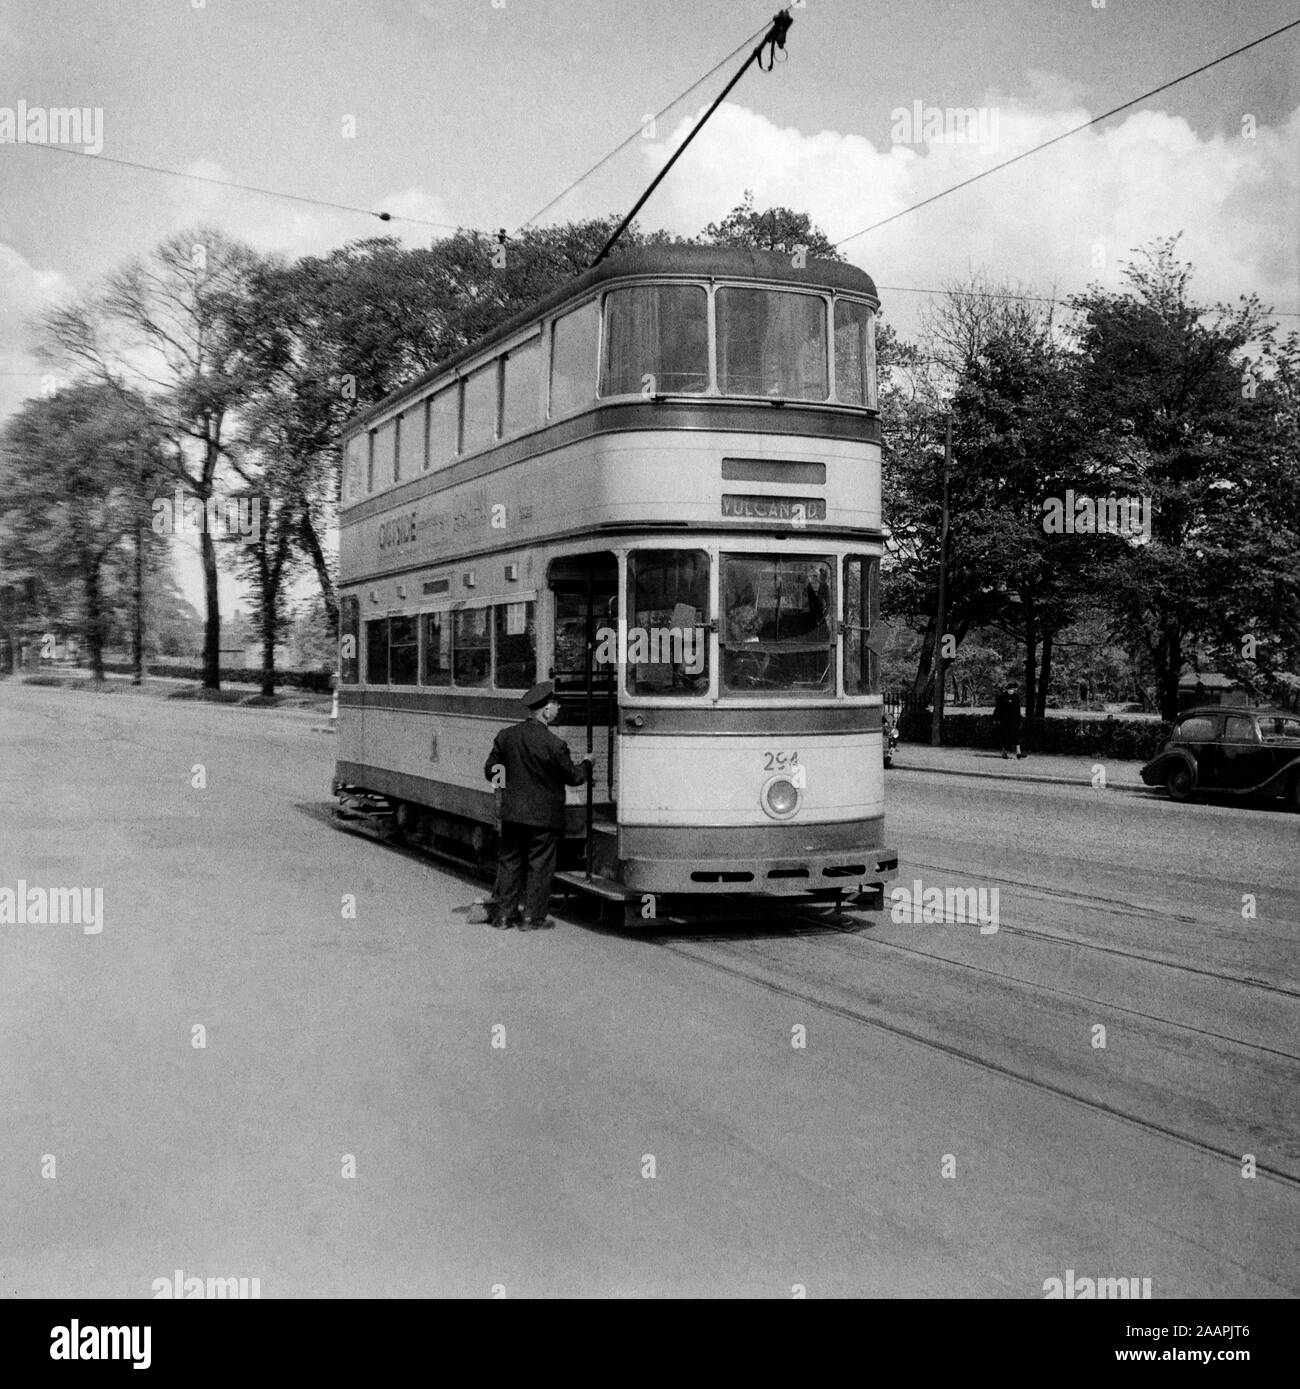 Sheffield Corporation Standard Tram no 294 at its terminus and going on route to Vulcan Road. Image taken during the 1950s. Please note that due to the age of the image, there may be imperfections showing. Stock Photo